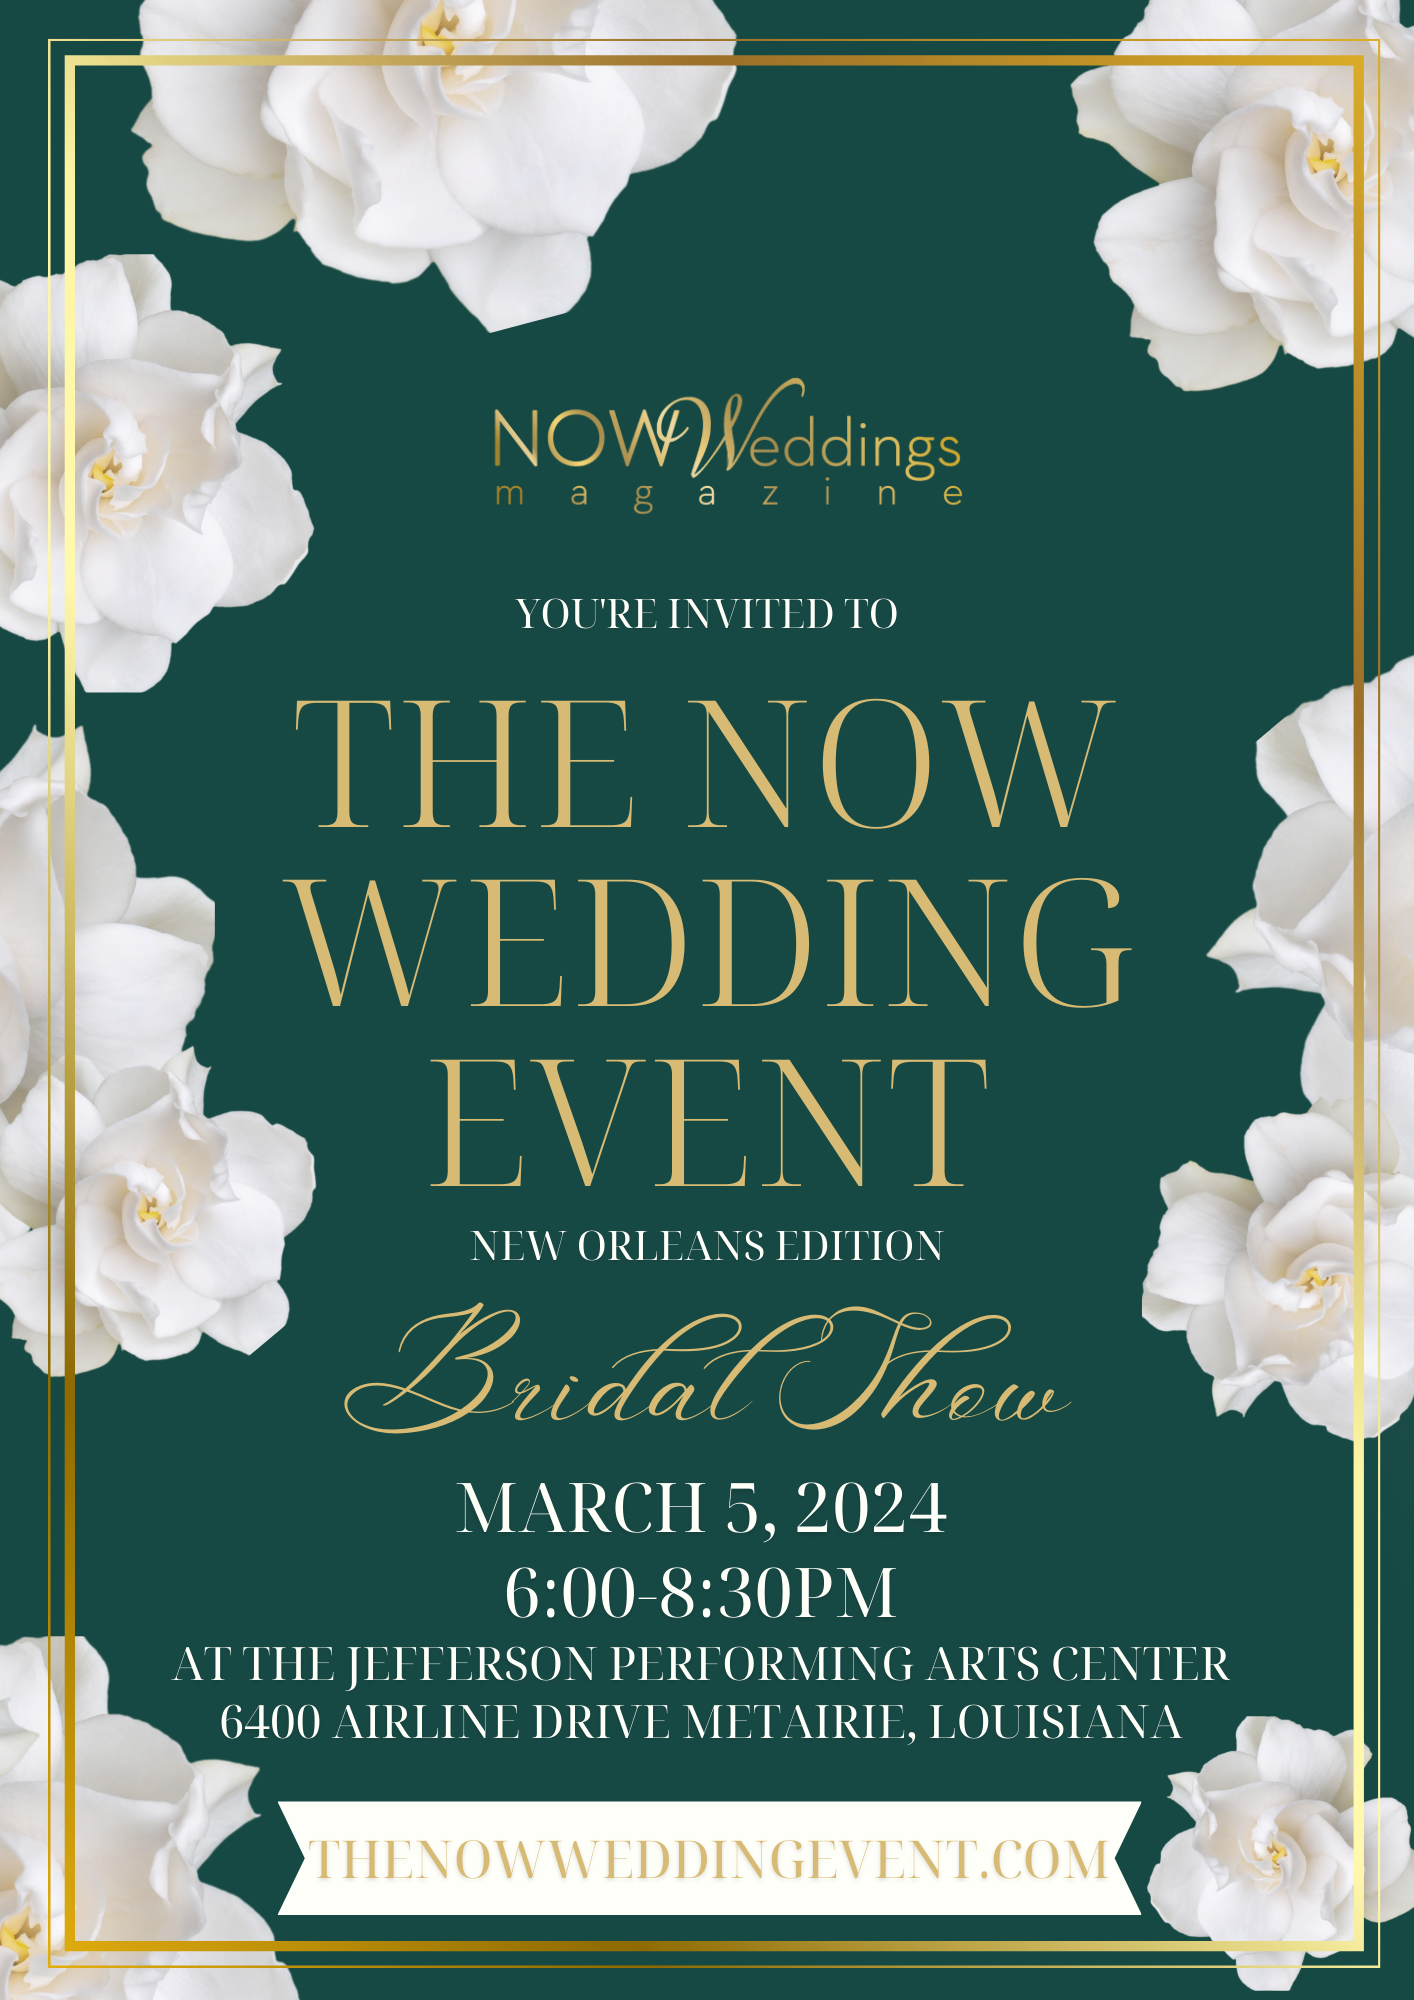 The NOW Wedding Event New Orleans Edition 2024 March 5, 2024 at the Jefferson Performing Arts Center